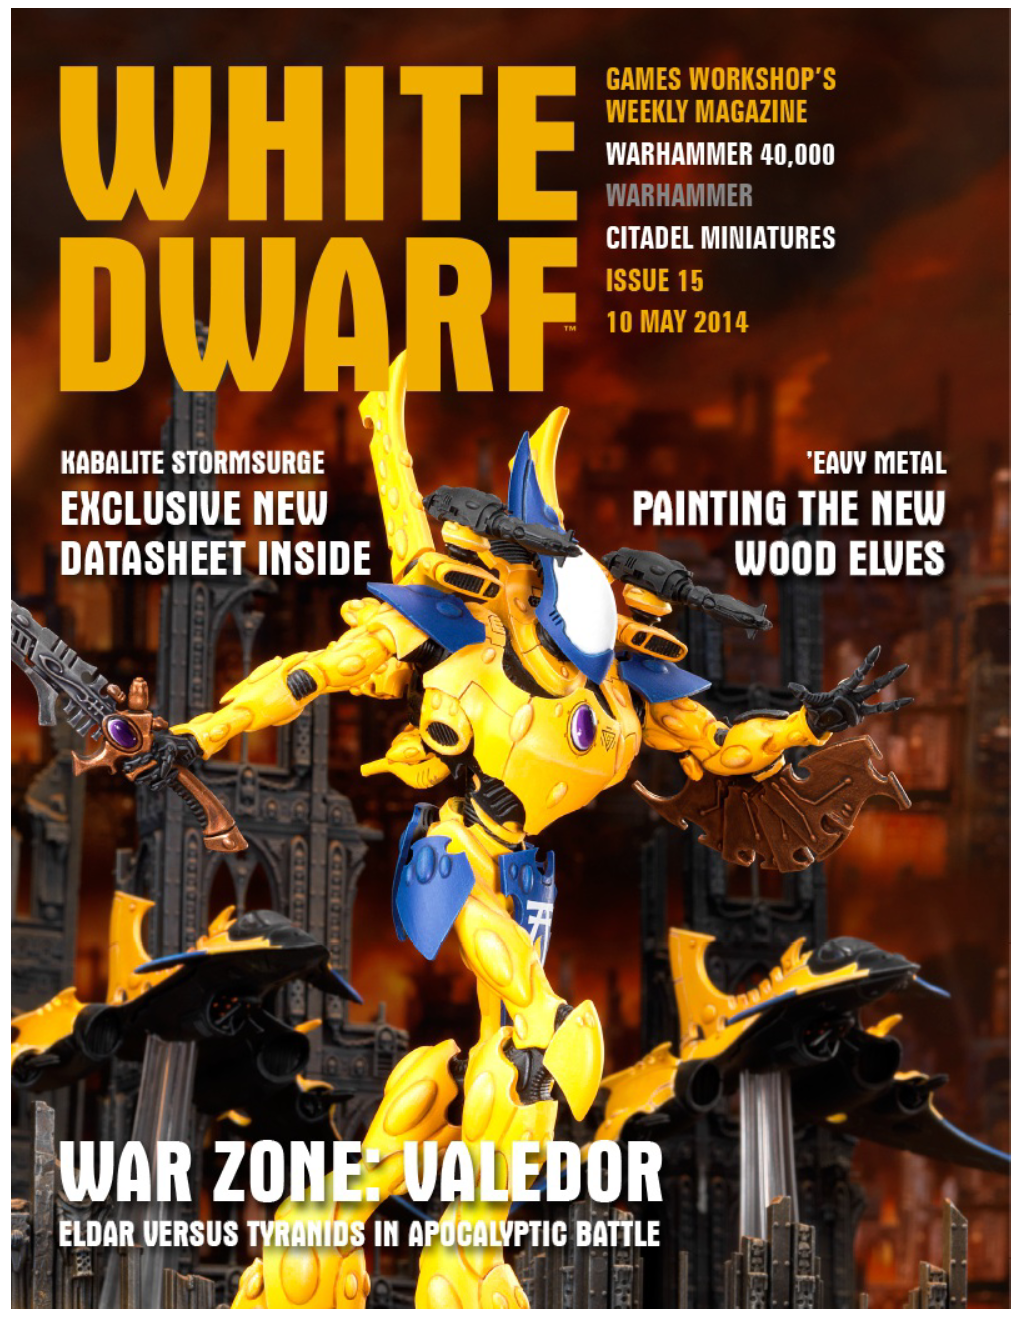 White Dwarf; It Would Be Another Year Before I Even Knew of the Magazine’S Existence, Much Less Things Such As the Warhammer Game